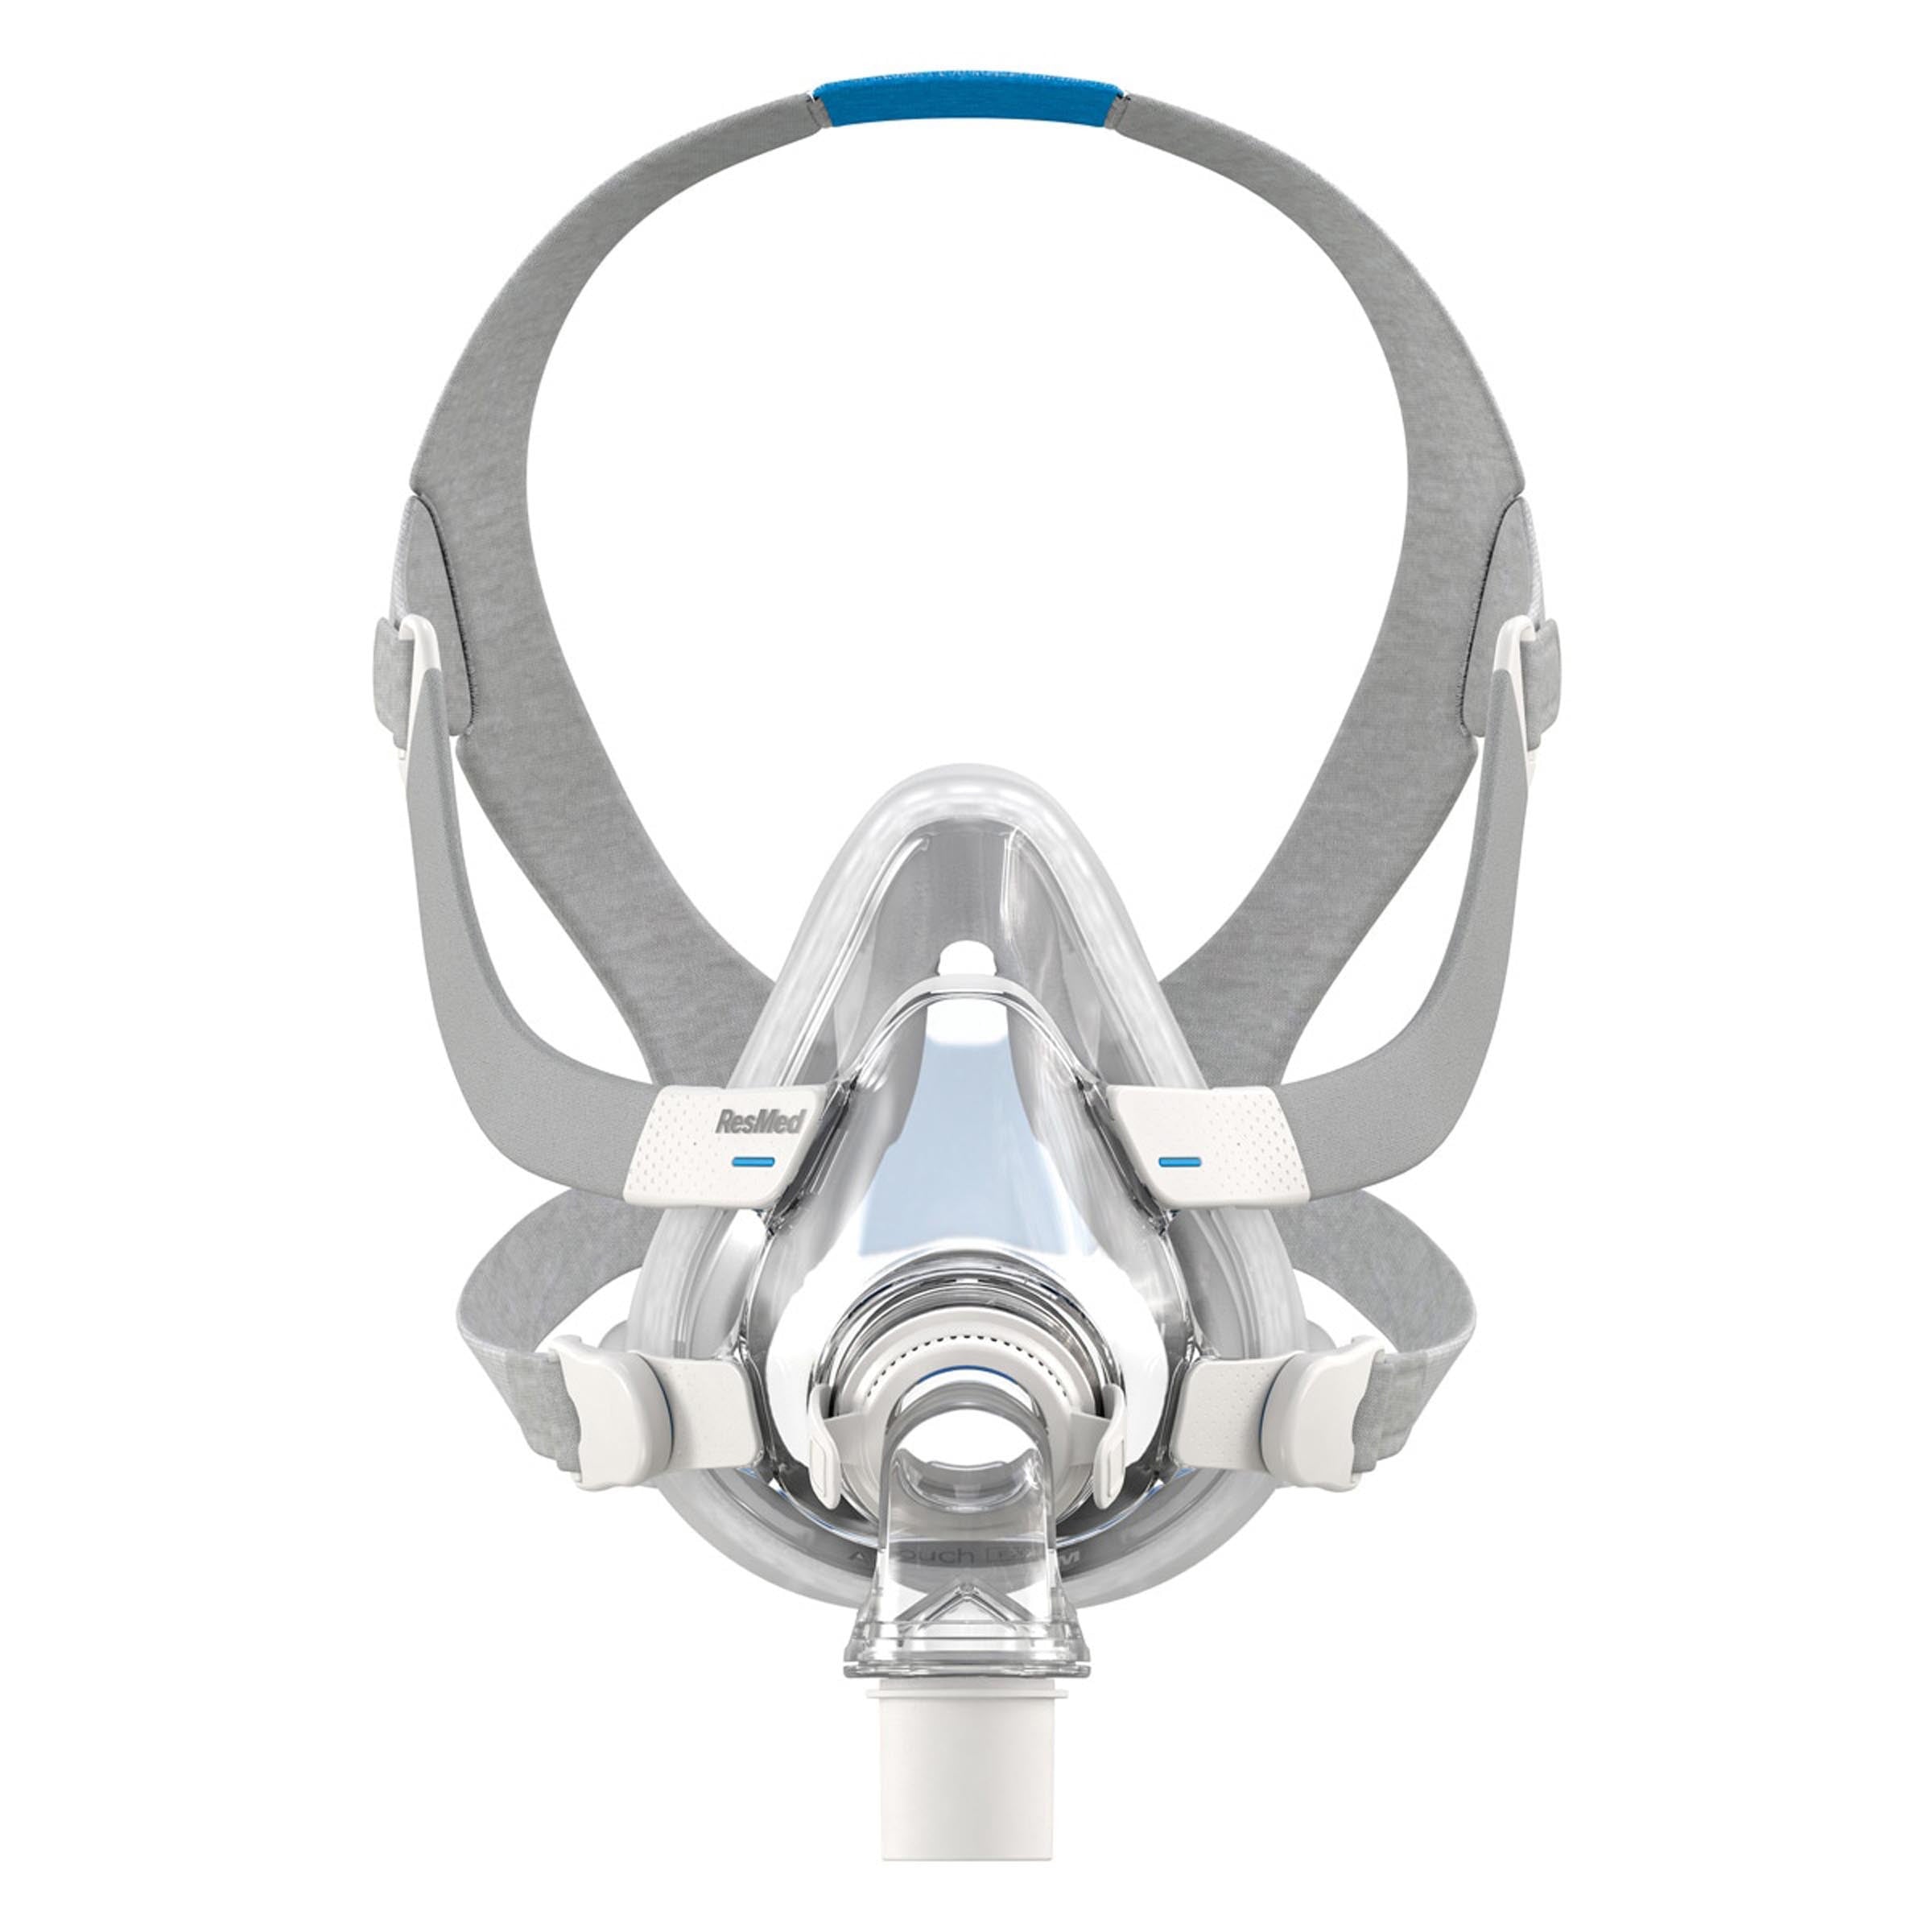 AirTouch F20 Full Face Mask - Morpheus Healthcare India